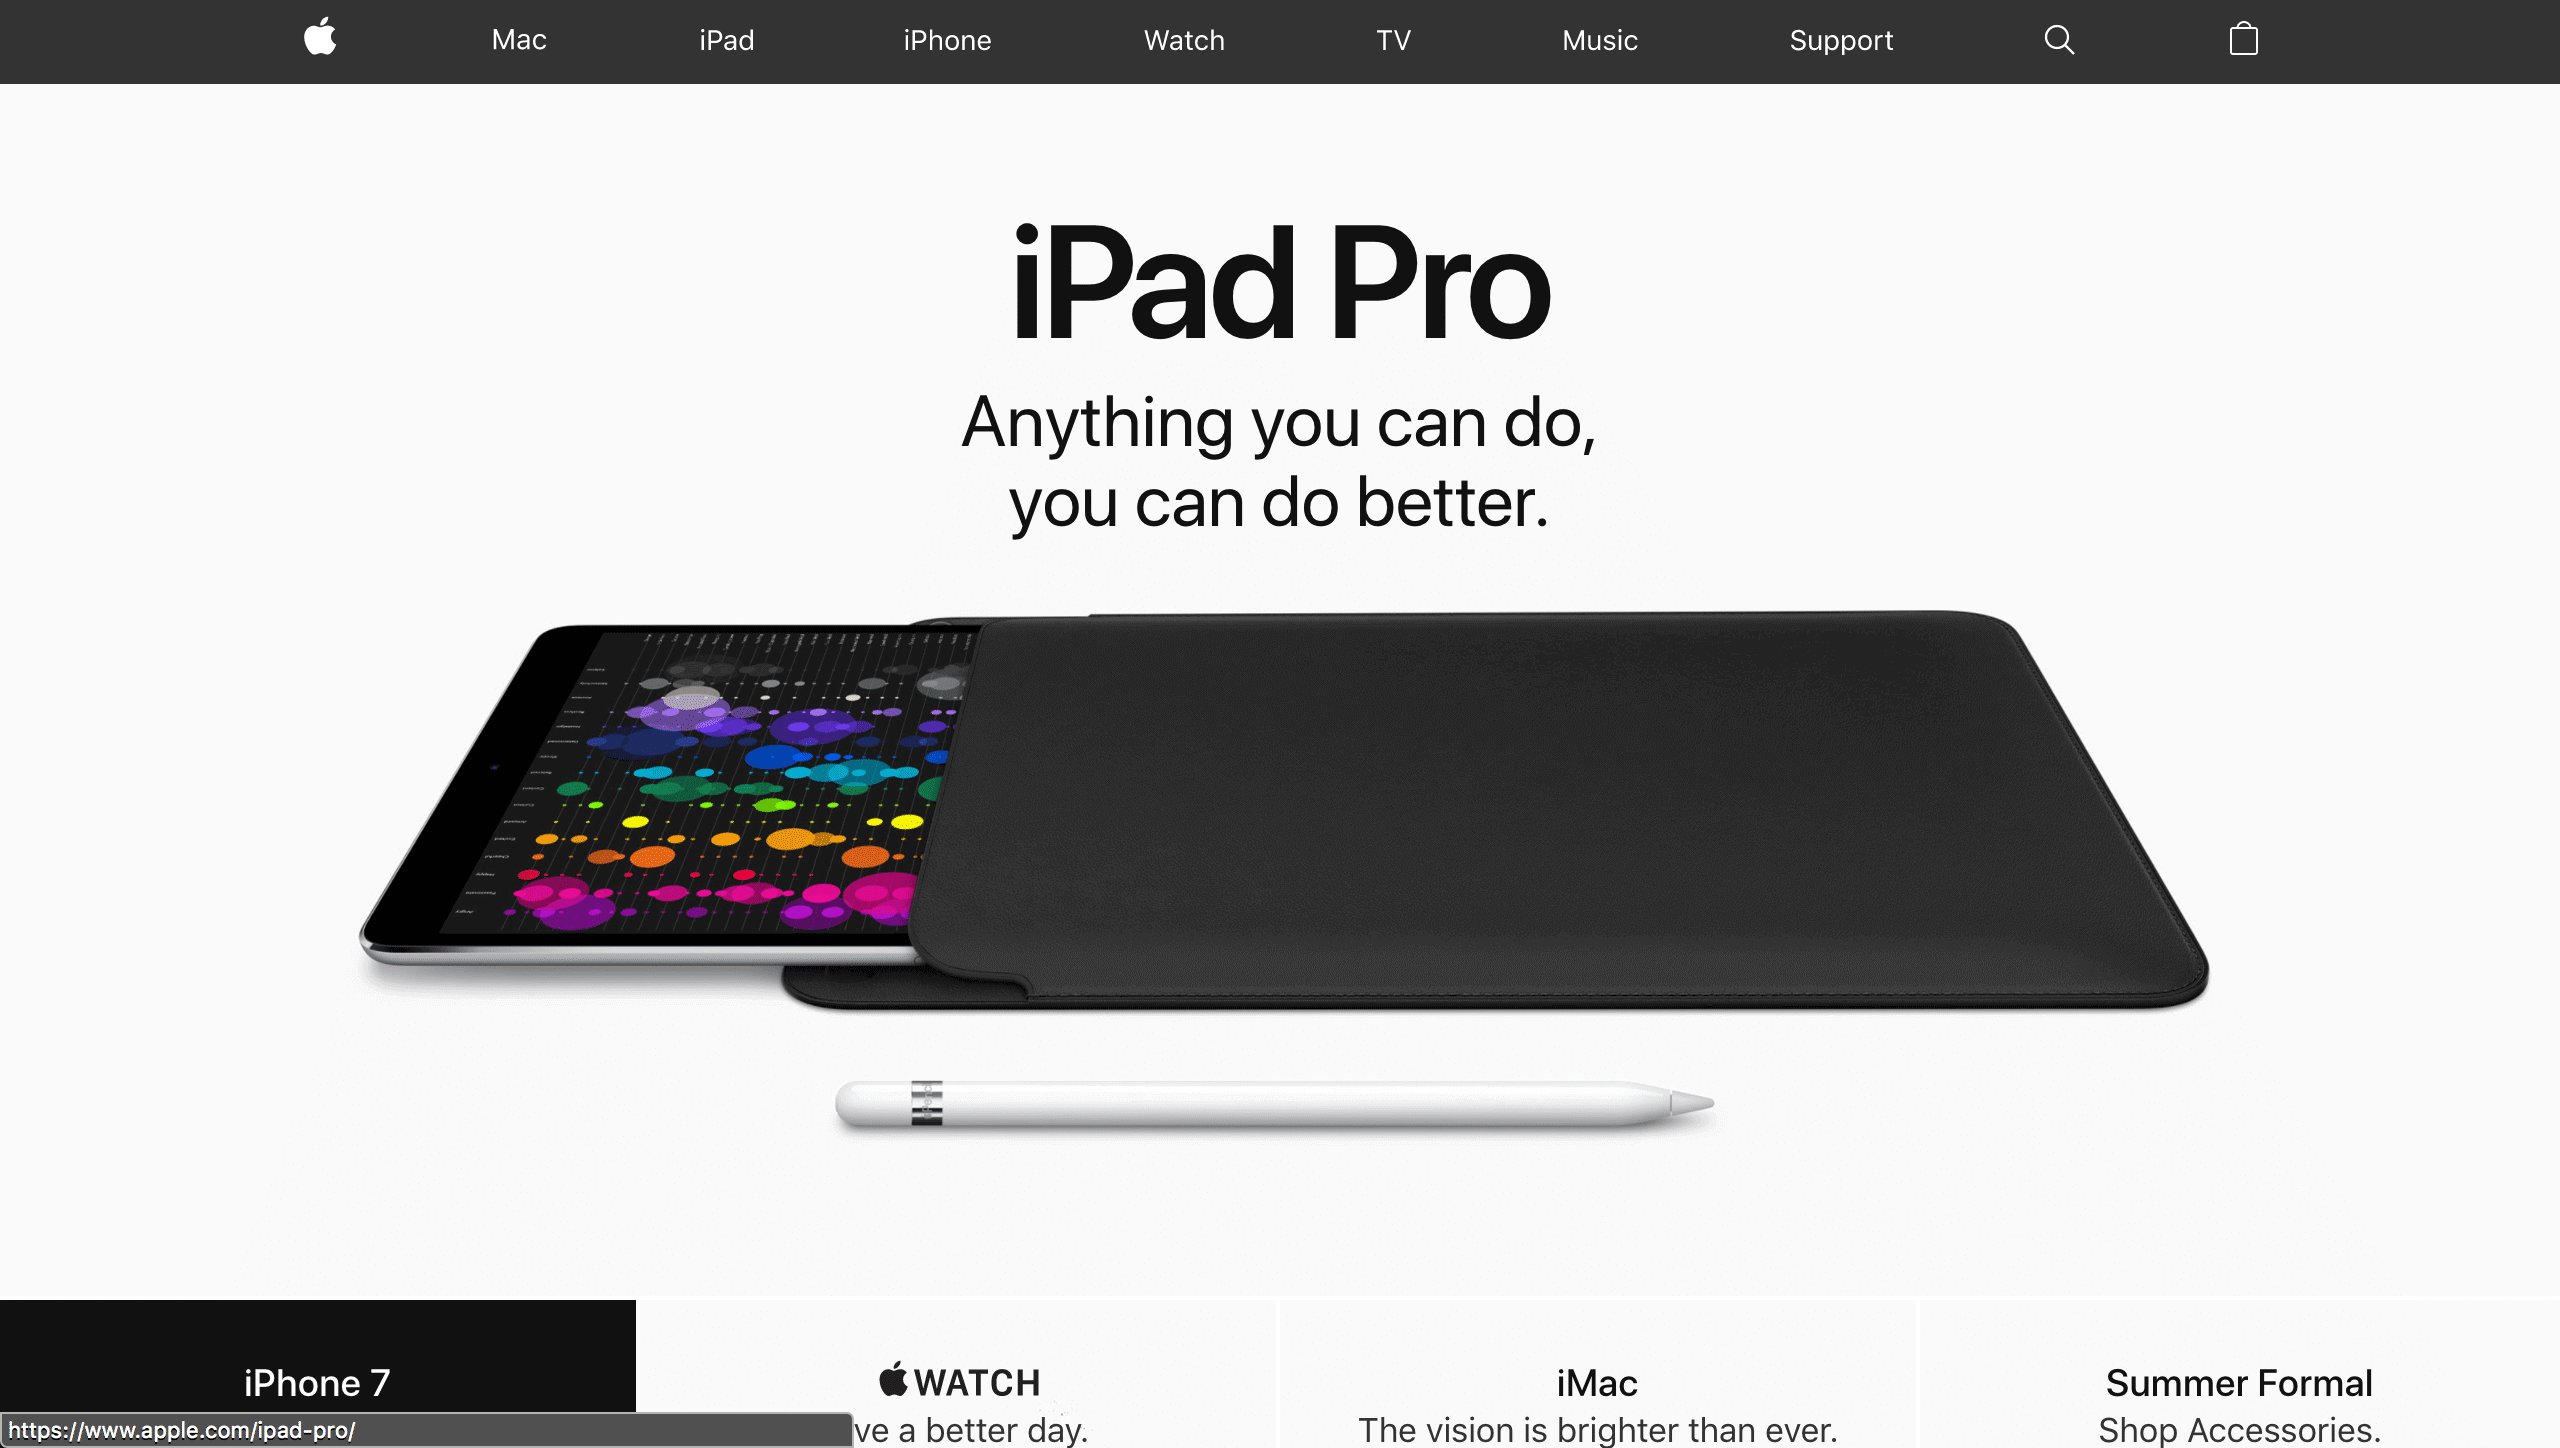 apple landing page for iPad Pro with headline "Anything you can do, you can do better."